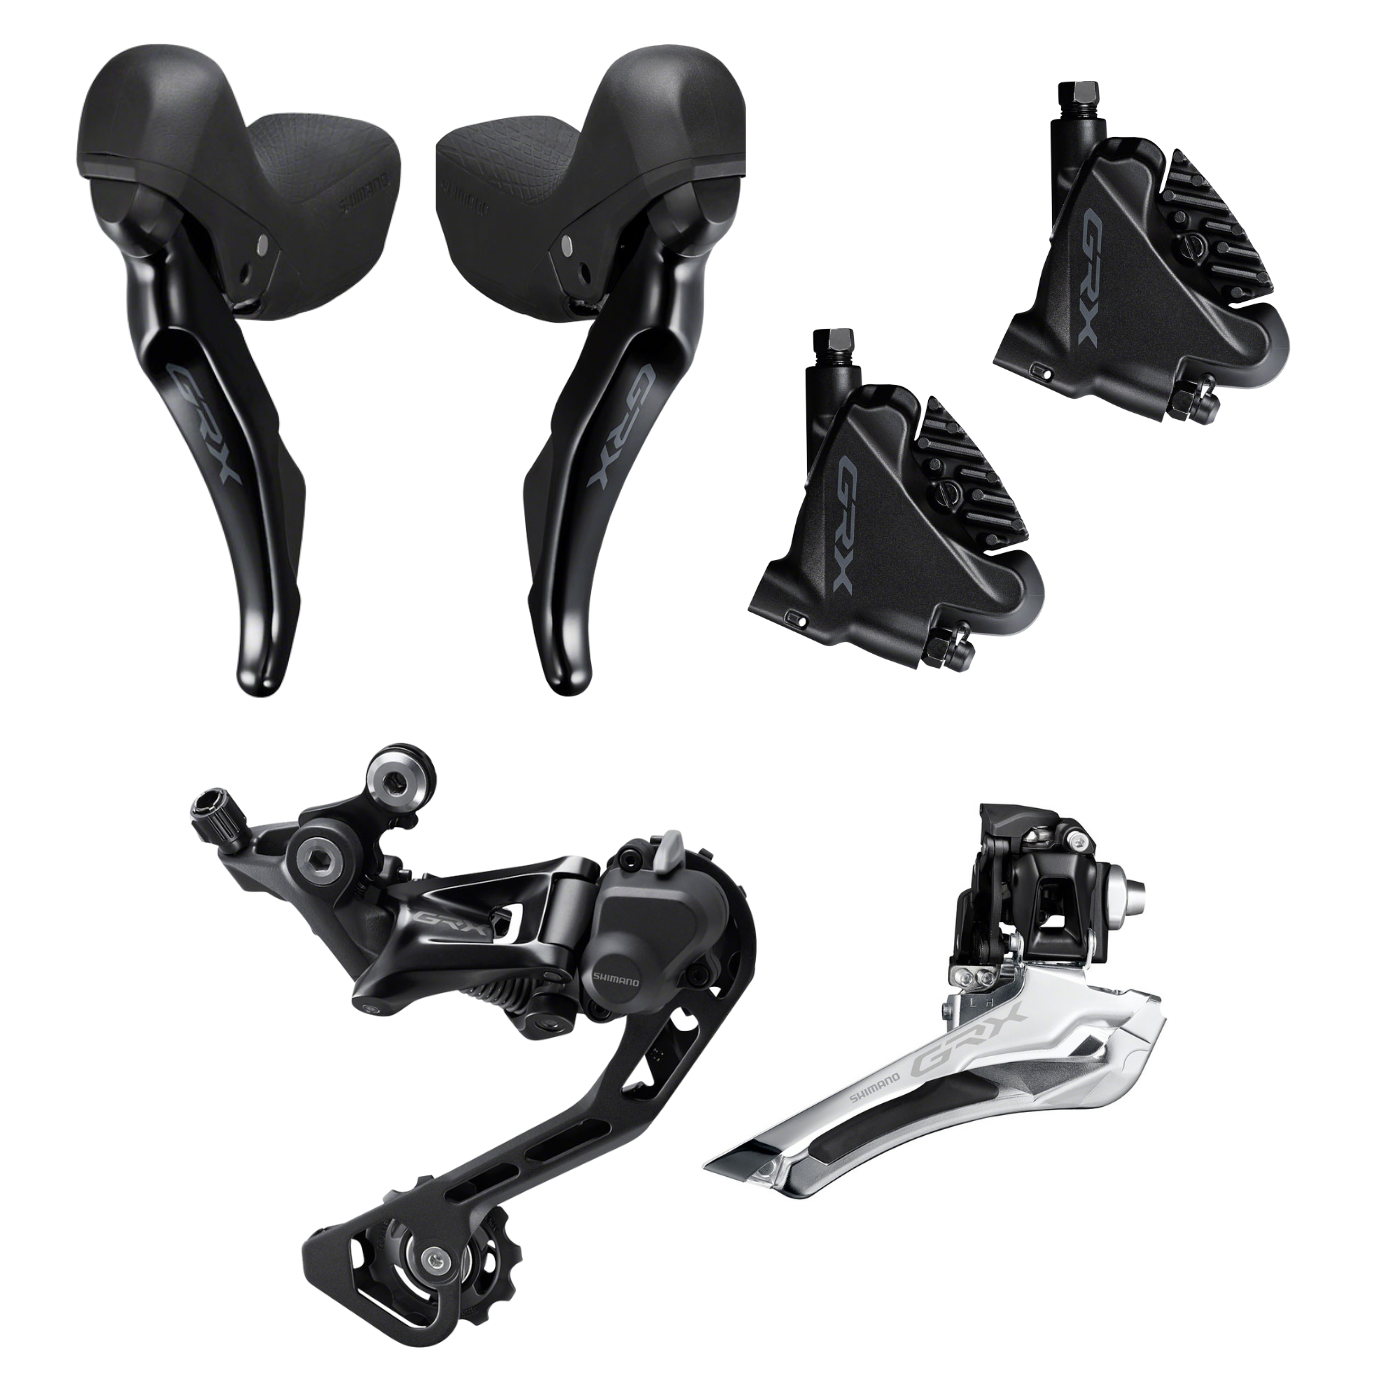 Shimano GRX RX400 10 Speed Hydraulic Mini Groupset - Shifters Brakes Derailleurs